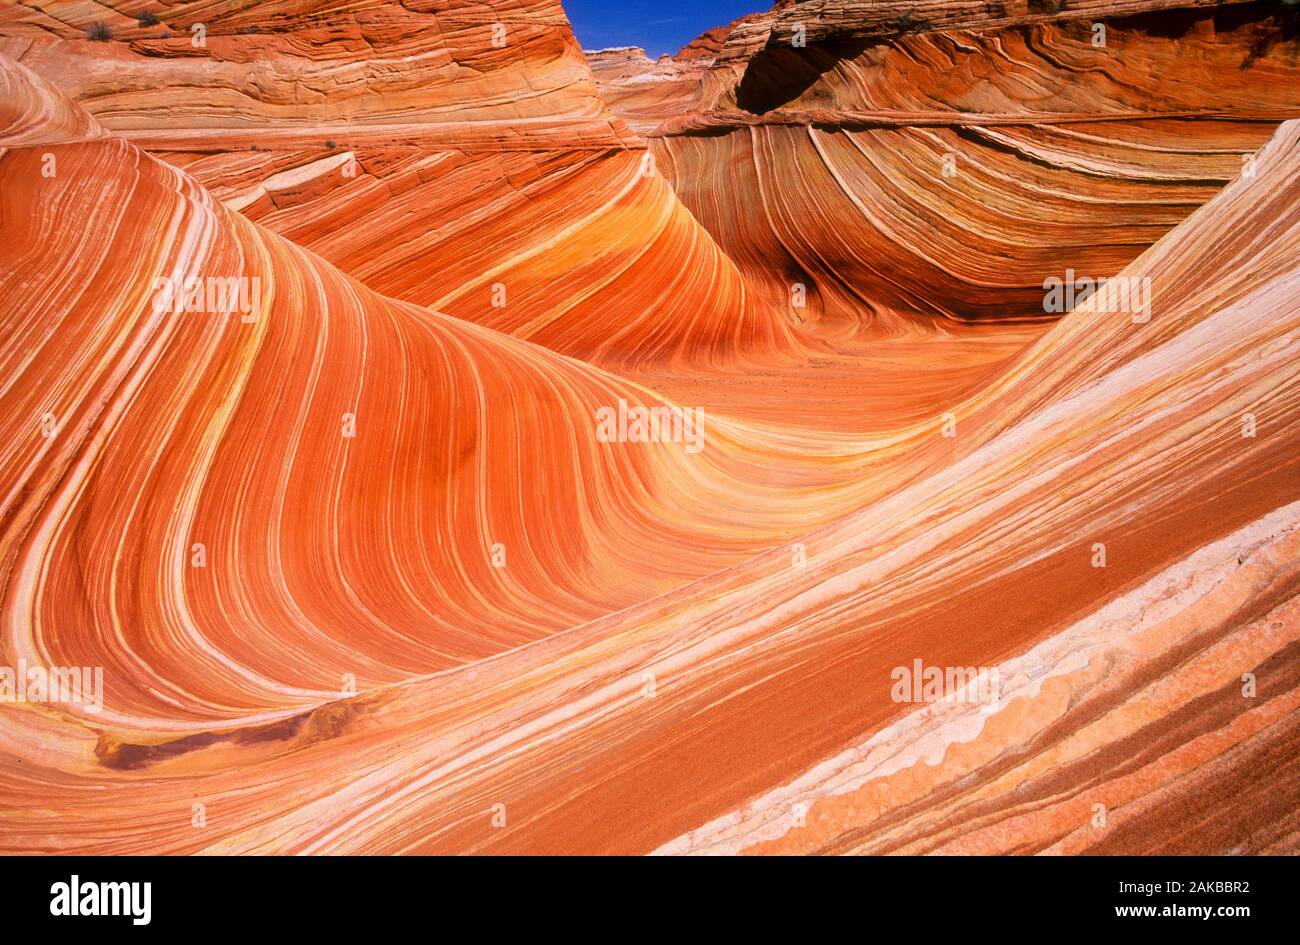 Paysage avec smooth rock formations in desert, Paria Canyon-Vermilion Cliffs Wilderness Area, Arizona, USA Banque D'Images